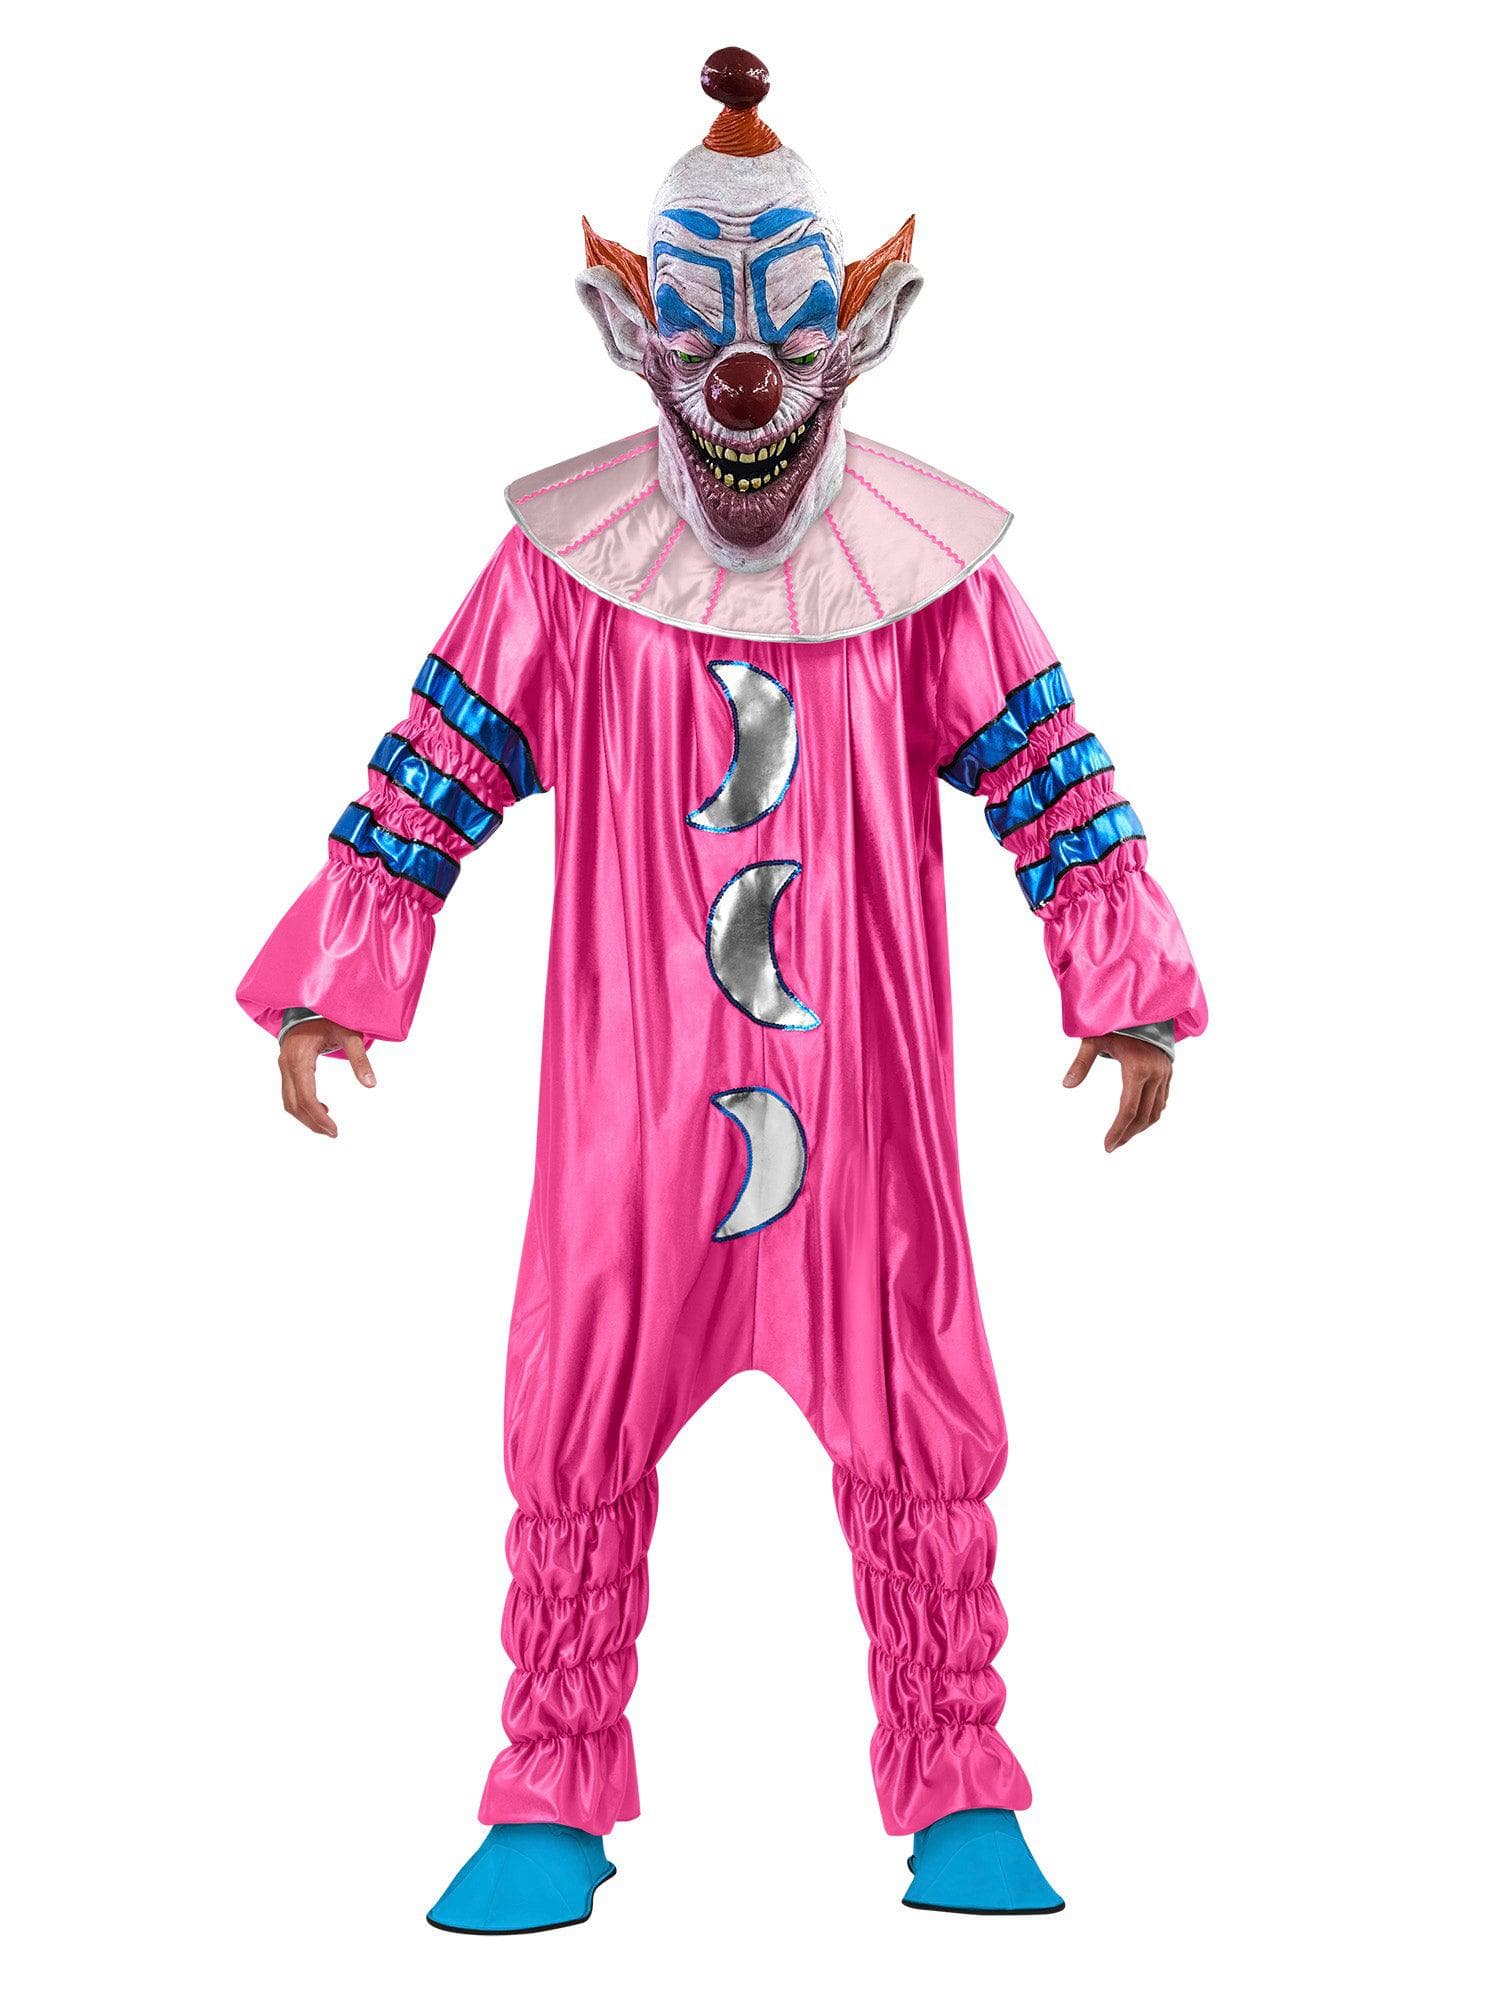 Killer Klowns from Outer Space Slim Adult Costume - costumes.com